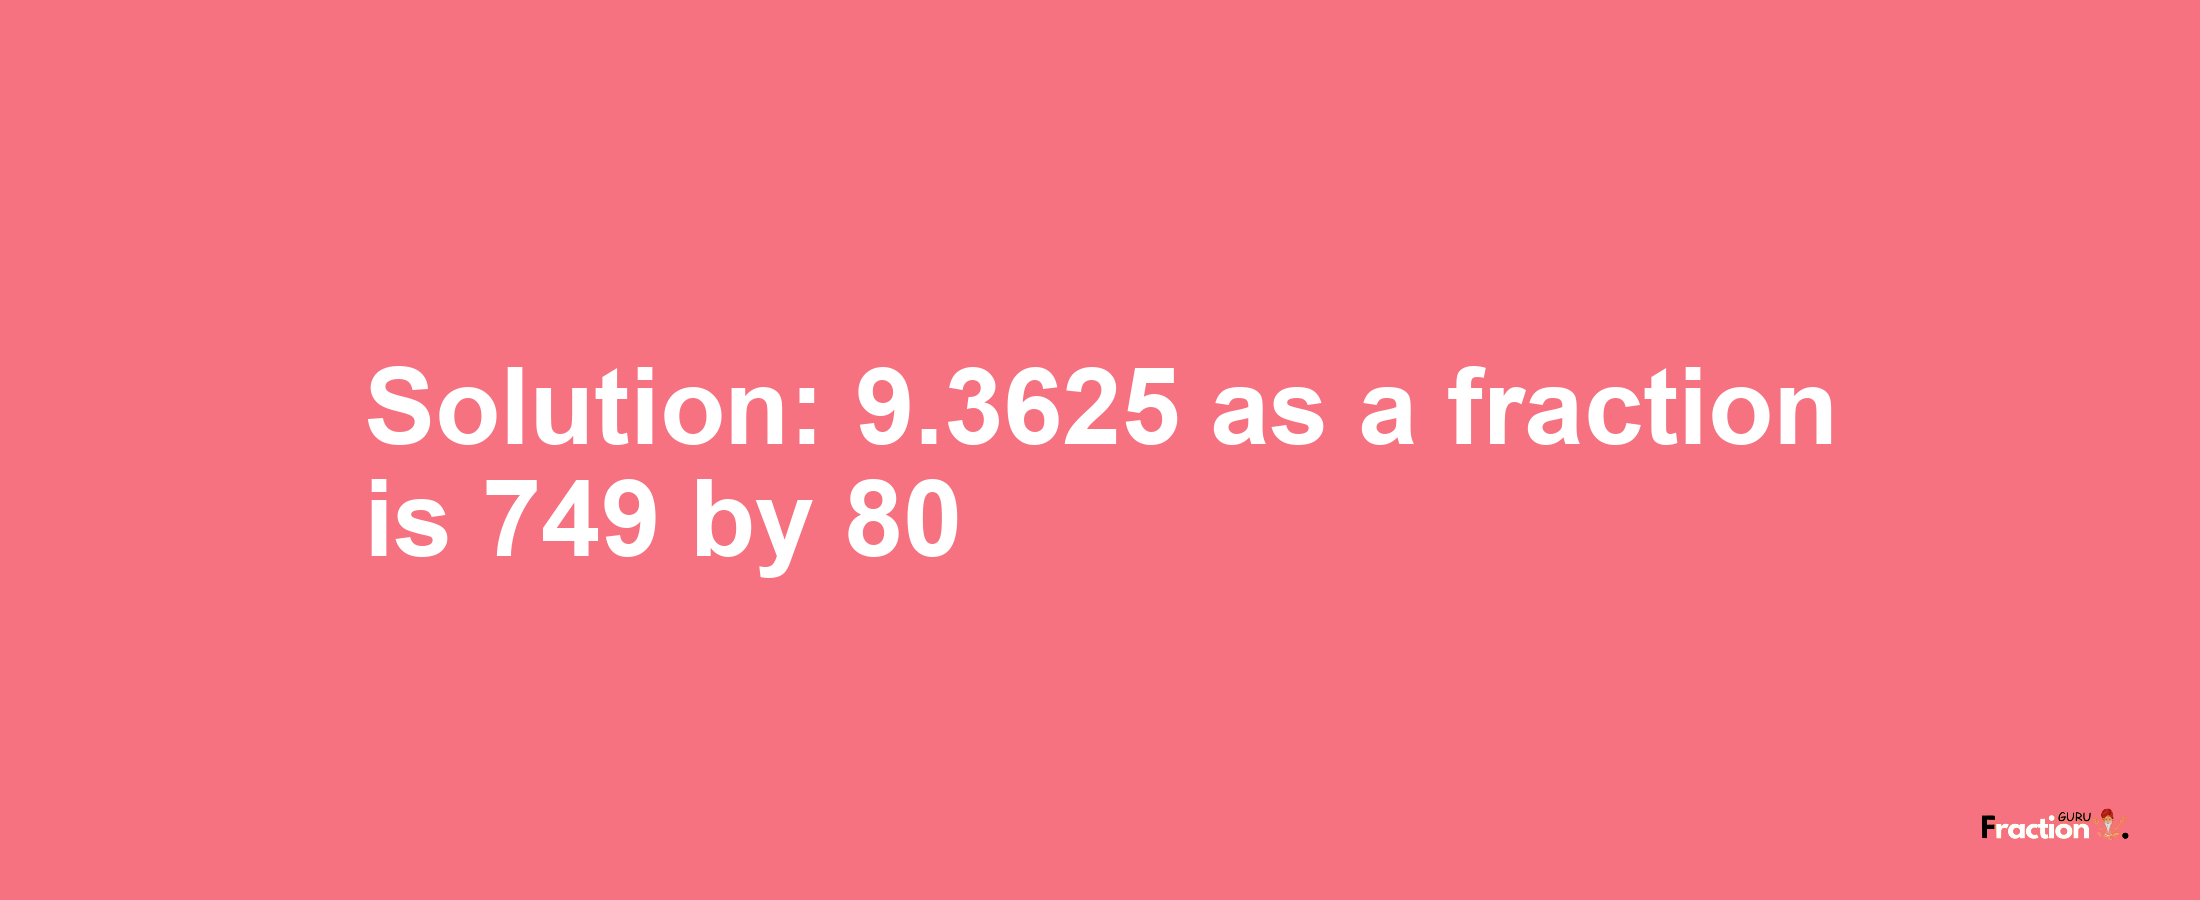 Solution:9.3625 as a fraction is 749/80